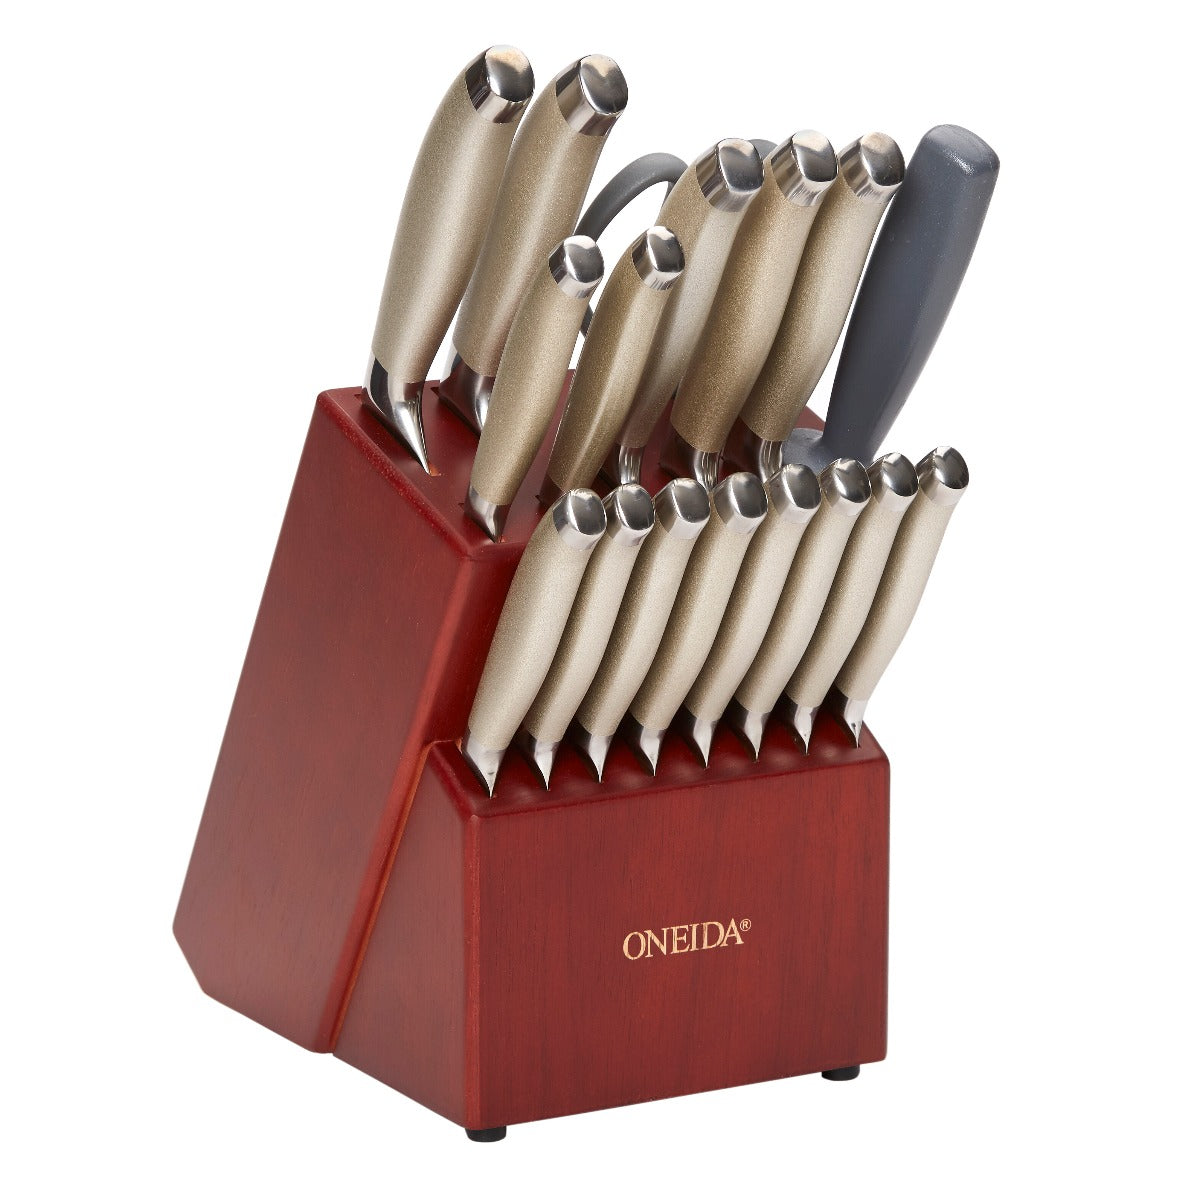 Oneida Stainless Steel Kitchen Knives & Cutlery Accessories